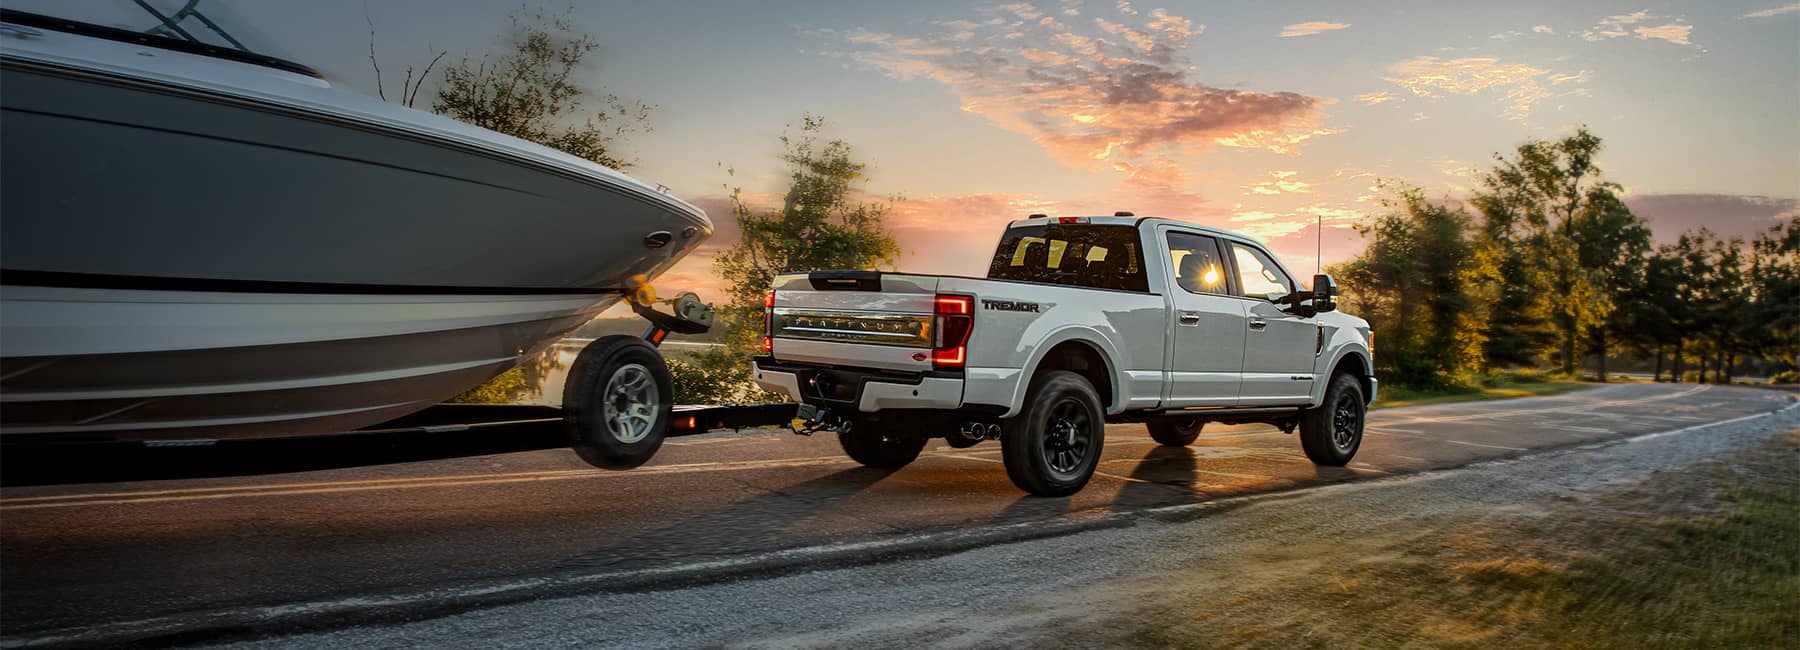 2022 Ford Super Duty pulling a boat_mobile